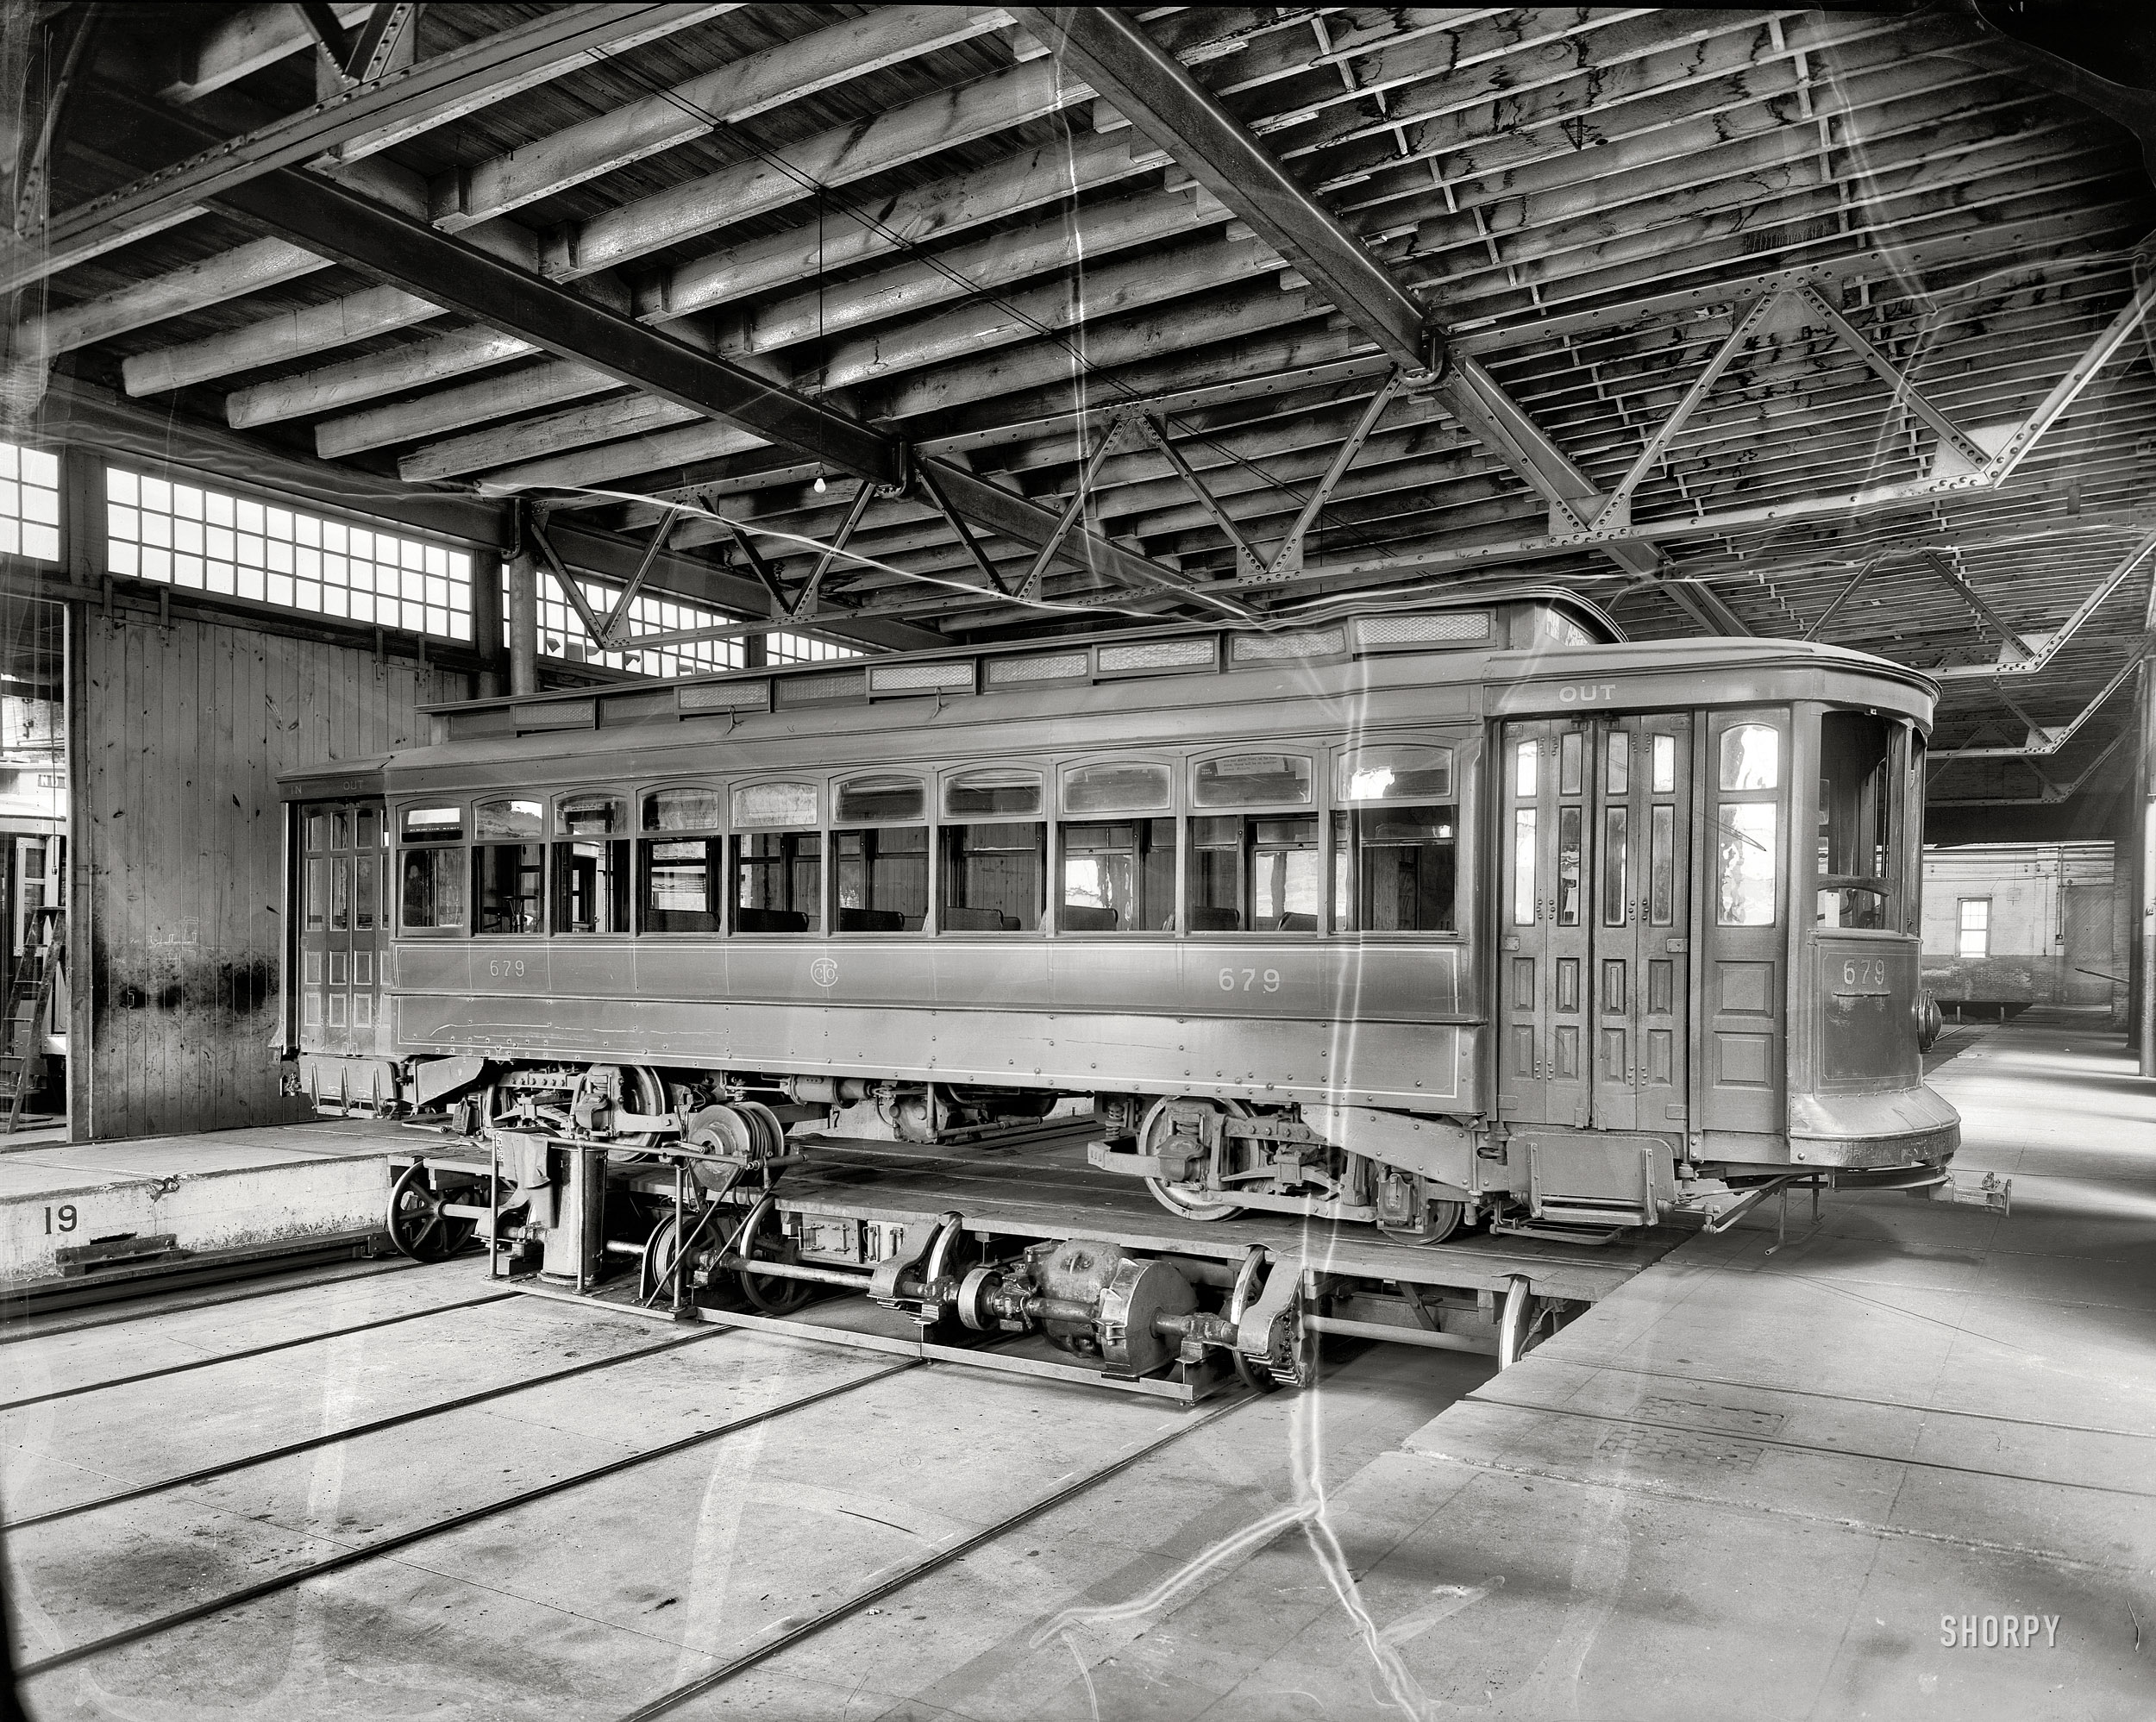 Washington, D.C., circa 1932. "Capital Traction Company trolley in car barn." 8x10 safety negative, National Photo Company Collection. View full size.